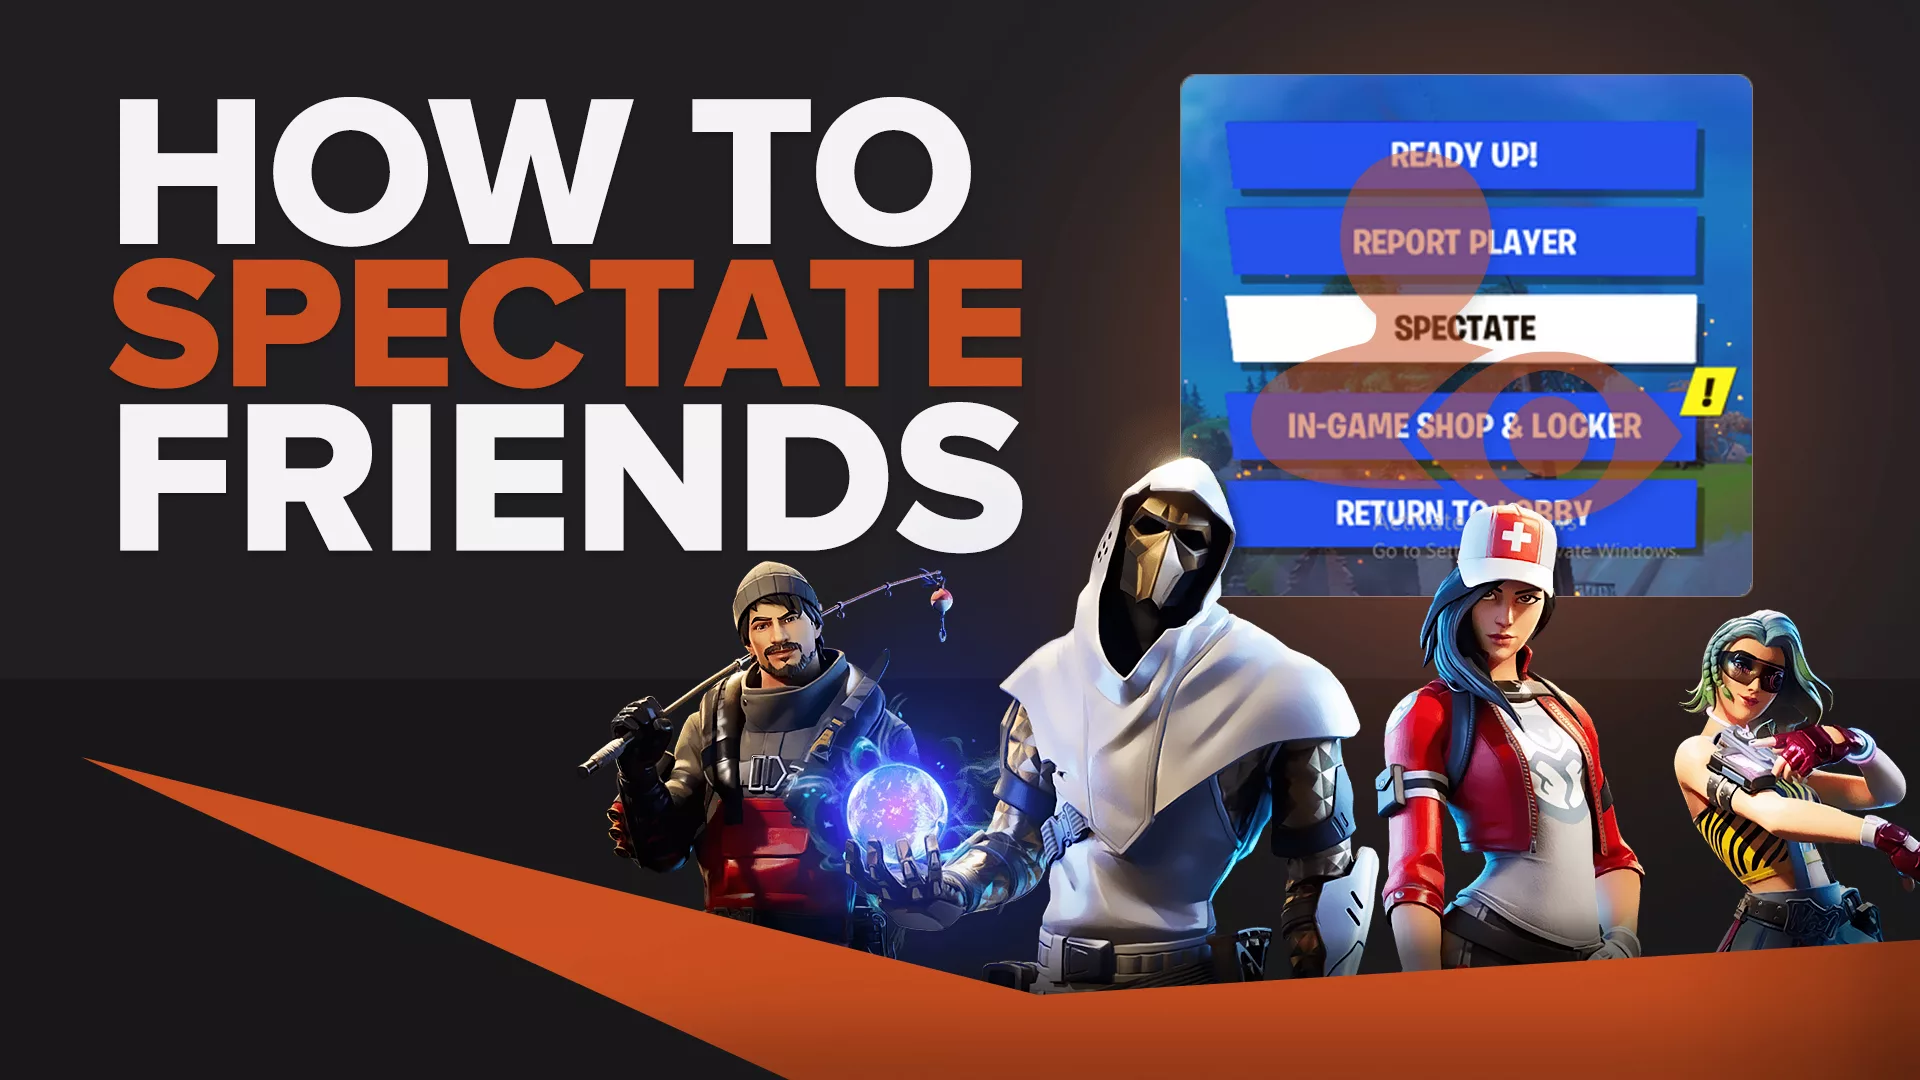 How To Spectate Friends in Fortnite